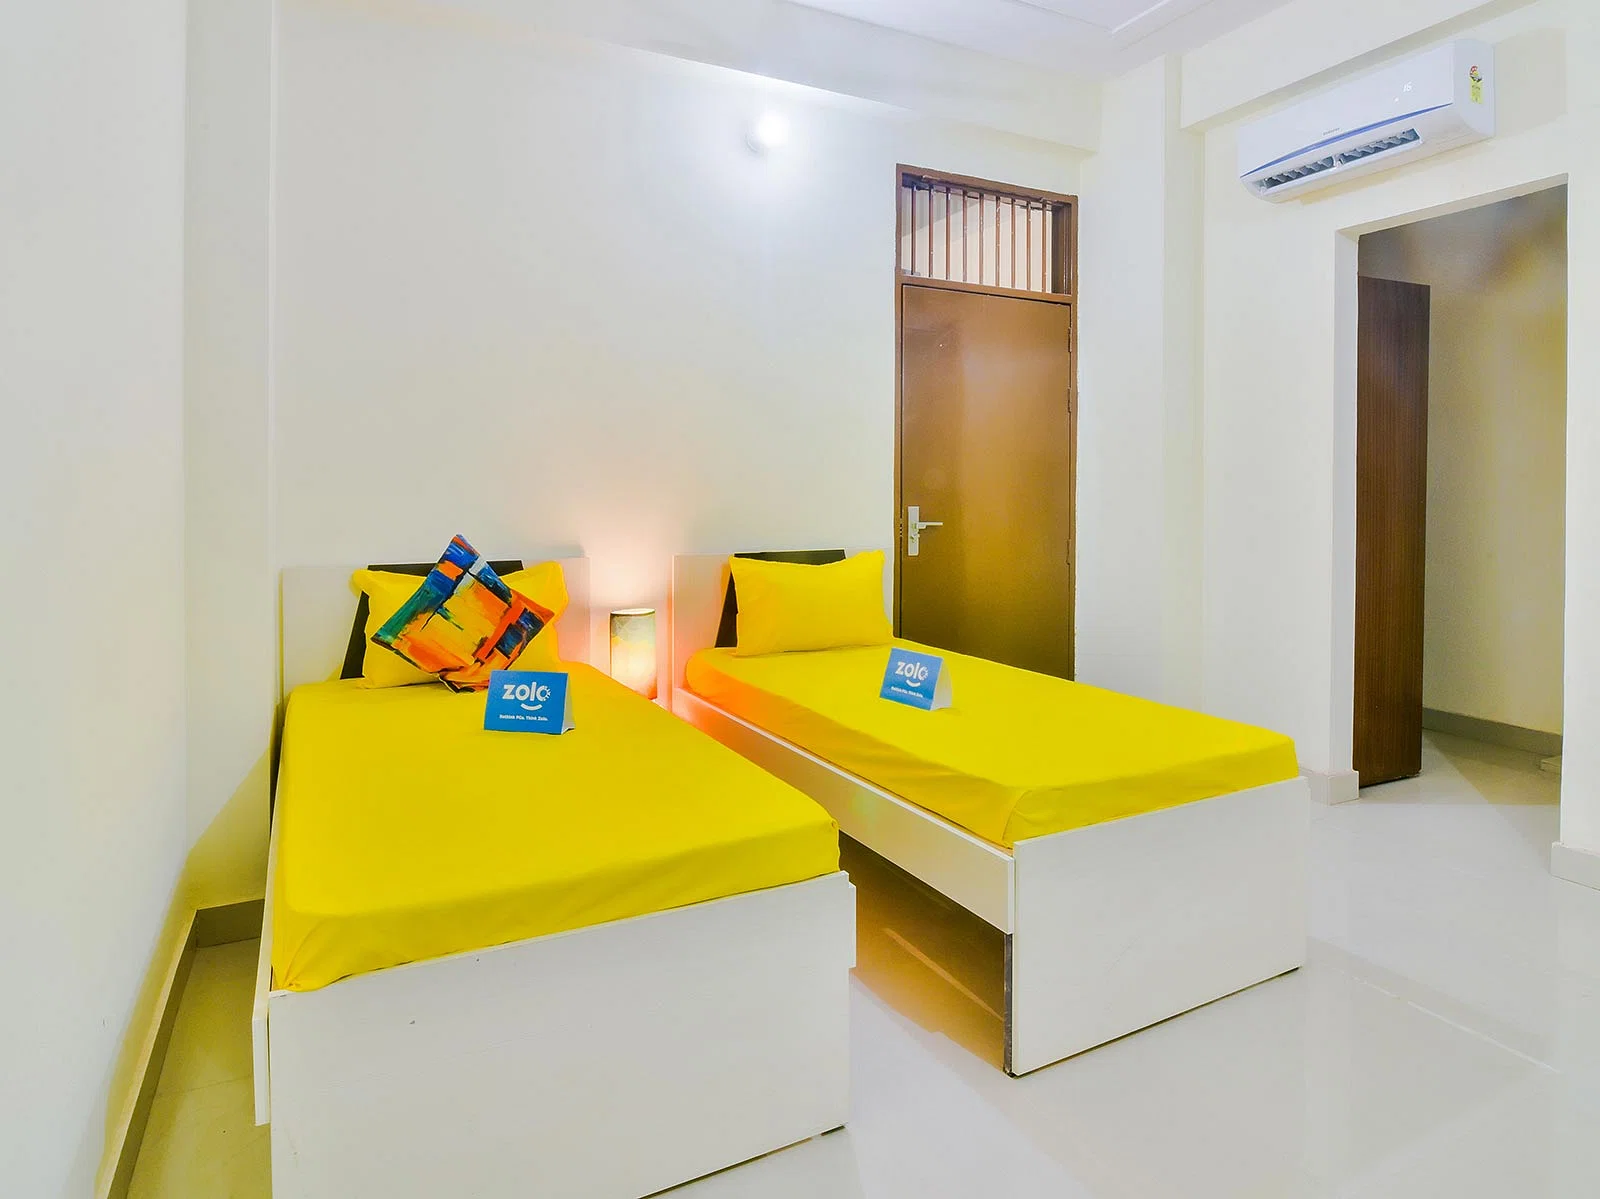 budget-friendly PGs and hostels for boys and girls with single rooms with daily hopusekeeping-Zolo La Lagoon